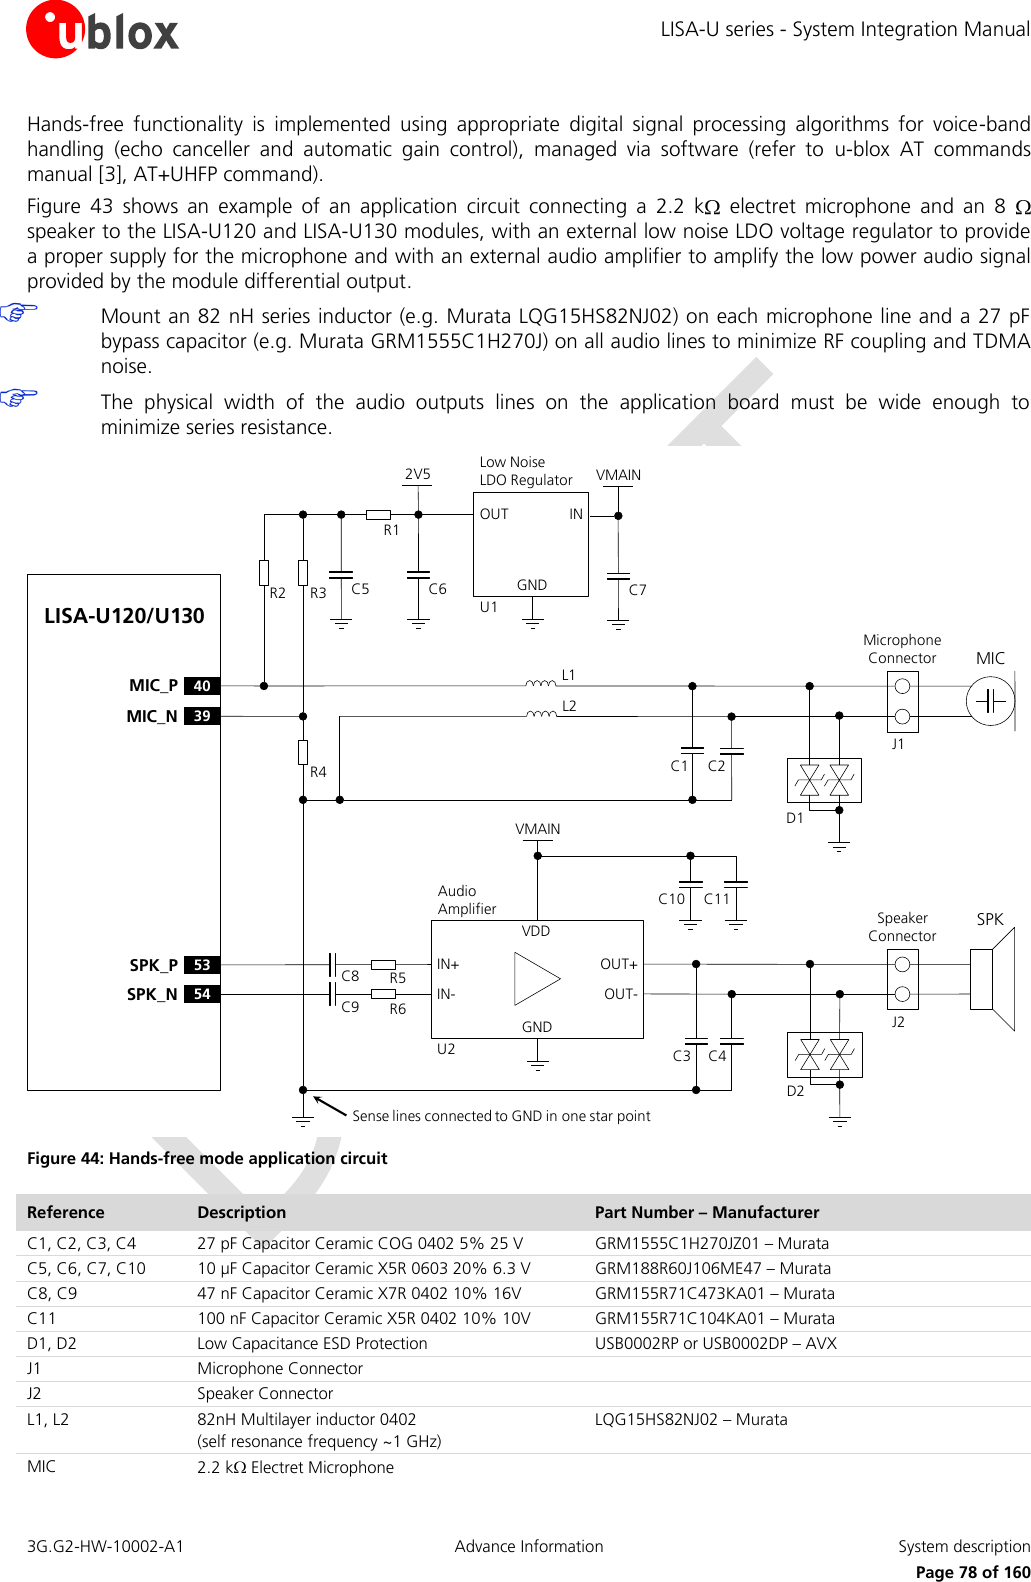 LISA-U series - System Integration Manual 3G.G2-HW-10002-A1  Advance Information  System description      Page 78 of 160 Hands-free  functionality  is  implemented  using  appropriate  digital  signal  processing  algorithms  for  voice-band handling  (echo  canceller  and  automatic  gain  control),  managed  via  software  (refer  to  u-blox AT  commands manual [3], AT+UHFP command). Figure  43  shows  an  example  of  an  application  circuit  connecting  a  2.2  k   electret  microphone  and  an 8   speaker to the LISA-U120 and LISA-U130 modules, with an external low noise LDO voltage regulator to provide a proper supply for the microphone and with an external audio amplifier to amplify the low power audio signal provided by the module differential output.  Mount an 82 nH series inductor (e.g. Murata LQG15HS82NJ02) on each microphone line and a 27 pF bypass capacitor (e.g. Murata GRM1555C1H270J) on all audio lines to minimize RF coupling and TDMA noise.  The  physical  width  of  the  audio  outputs  lines  on  the  application  board  must  be  wide  enough  to minimize series resistance. C1 C2C3L139MIC_N53SPK_P40MIC_P54SPK_ND1Microphone ConnectorD2INOUTGNDLow Noise LDO RegulatorU1R4R1C6R3R2 C52V5Sense lines connected to GND in one star pointC4SPKL2MICSpeaker ConnectorOUT+IN+GNDVMAINU2OUT-IN-C8C9R5R6VDDC11C10LISA-U120/U130Audio AmplifierJ1J2VMAINC7 Figure 44: Hands-free mode application circuit Reference Description Part Number – Manufacturer C1, C2, C3, C4 27 pF Capacitor Ceramic COG 0402 5% 25 V  GRM1555C1H270JZ01 – Murata C5, C6, C7, C10 10 µF Capacitor Ceramic X5R 0603 20% 6.3 V GRM188R60J106ME47 – Murata C8, C9 47 nF Capacitor Ceramic X7R 0402 10% 16V GRM155R71C473KA01 – Murata C11 100 nF Capacitor Ceramic X5R 0402 10% 10V GRM155R71C104KA01 – Murata D1, D2 Low Capacitance ESD Protection USB0002RP or USB0002DP – AVX J1 Microphone Connector  J2 Speaker Connector  L1, L2 82nH Multilayer inductor 0402 (self resonance frequency ~1 GHz) LQG15HS82NJ02 – Murata MIC 2.2 k  Electret Microphone  